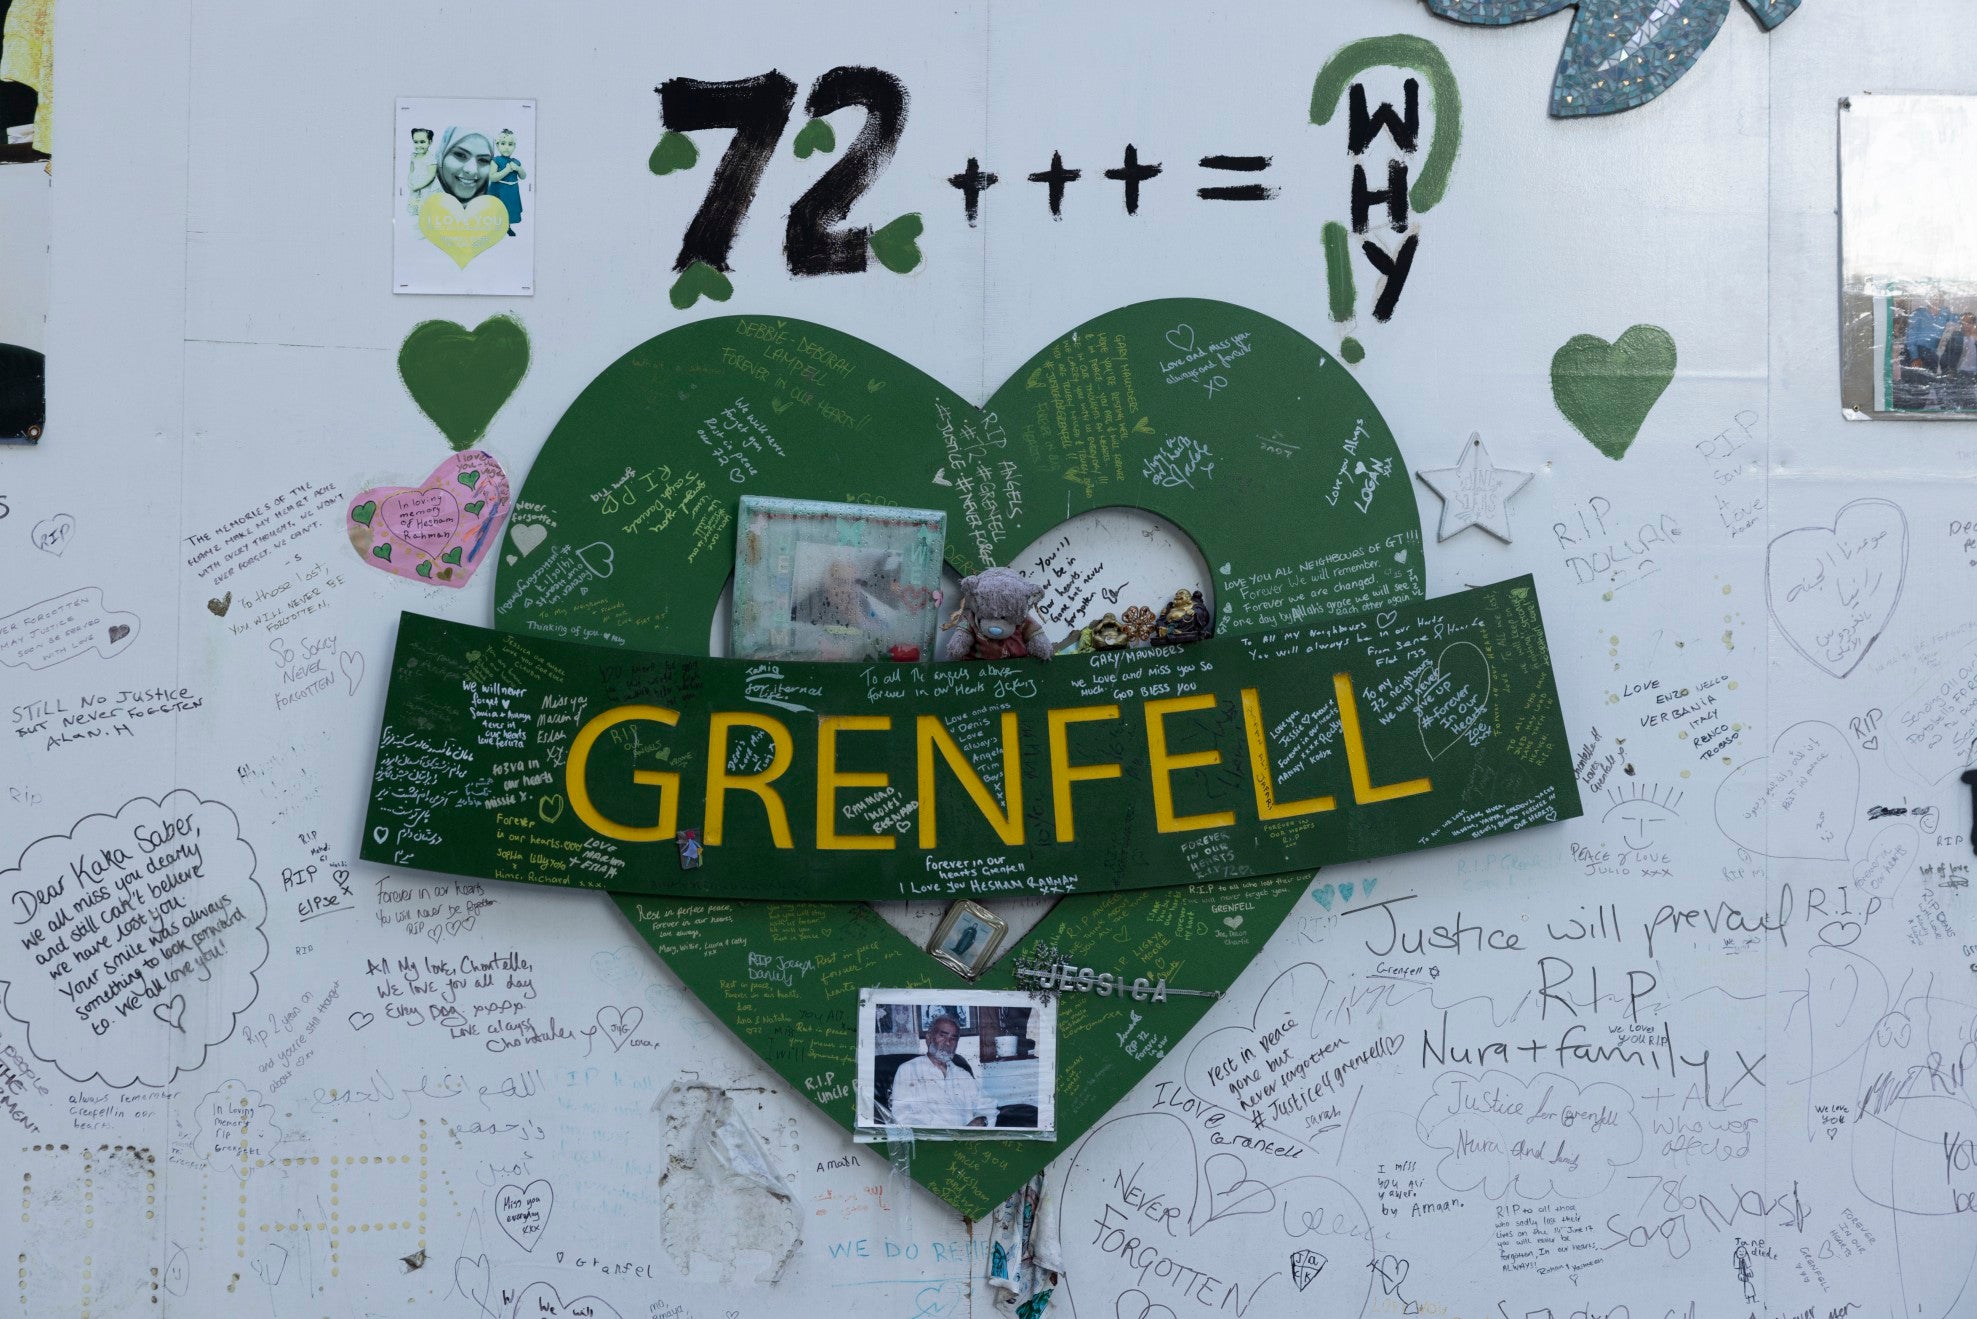 A number of things need to happen if we are to reduce the prospects of another Grenfell